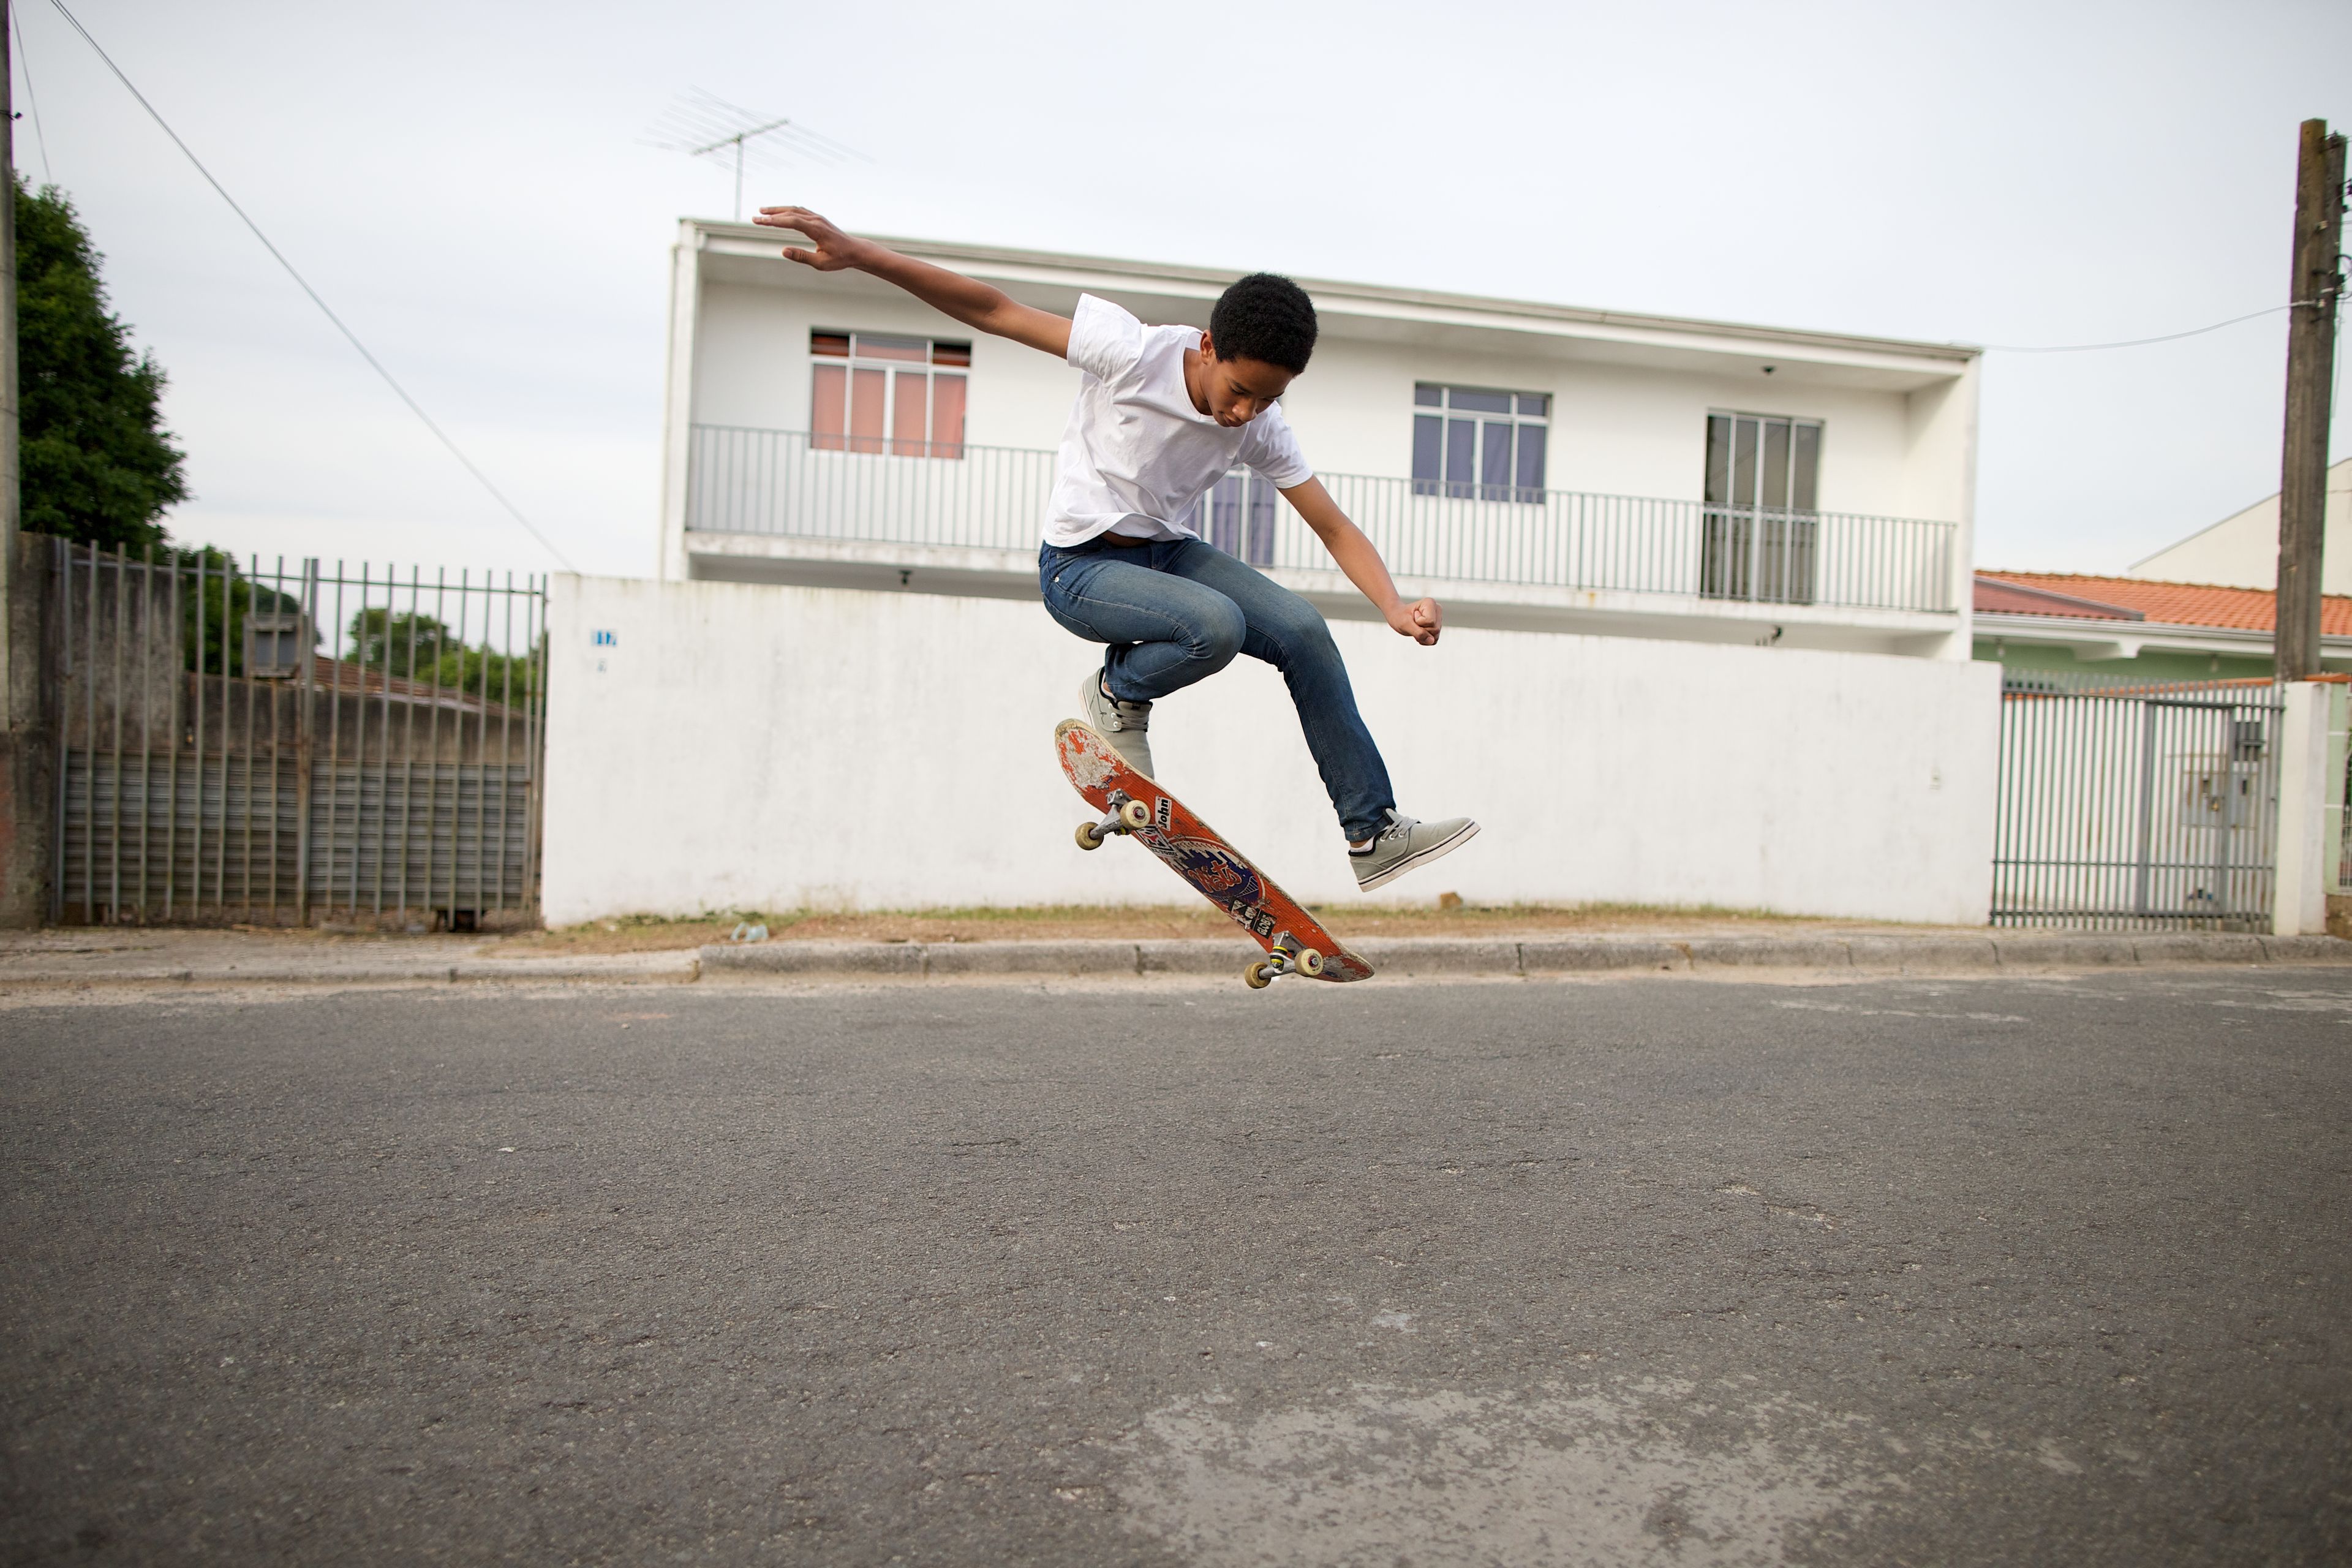 A young man from Brazil does a skateboard trick in a street.